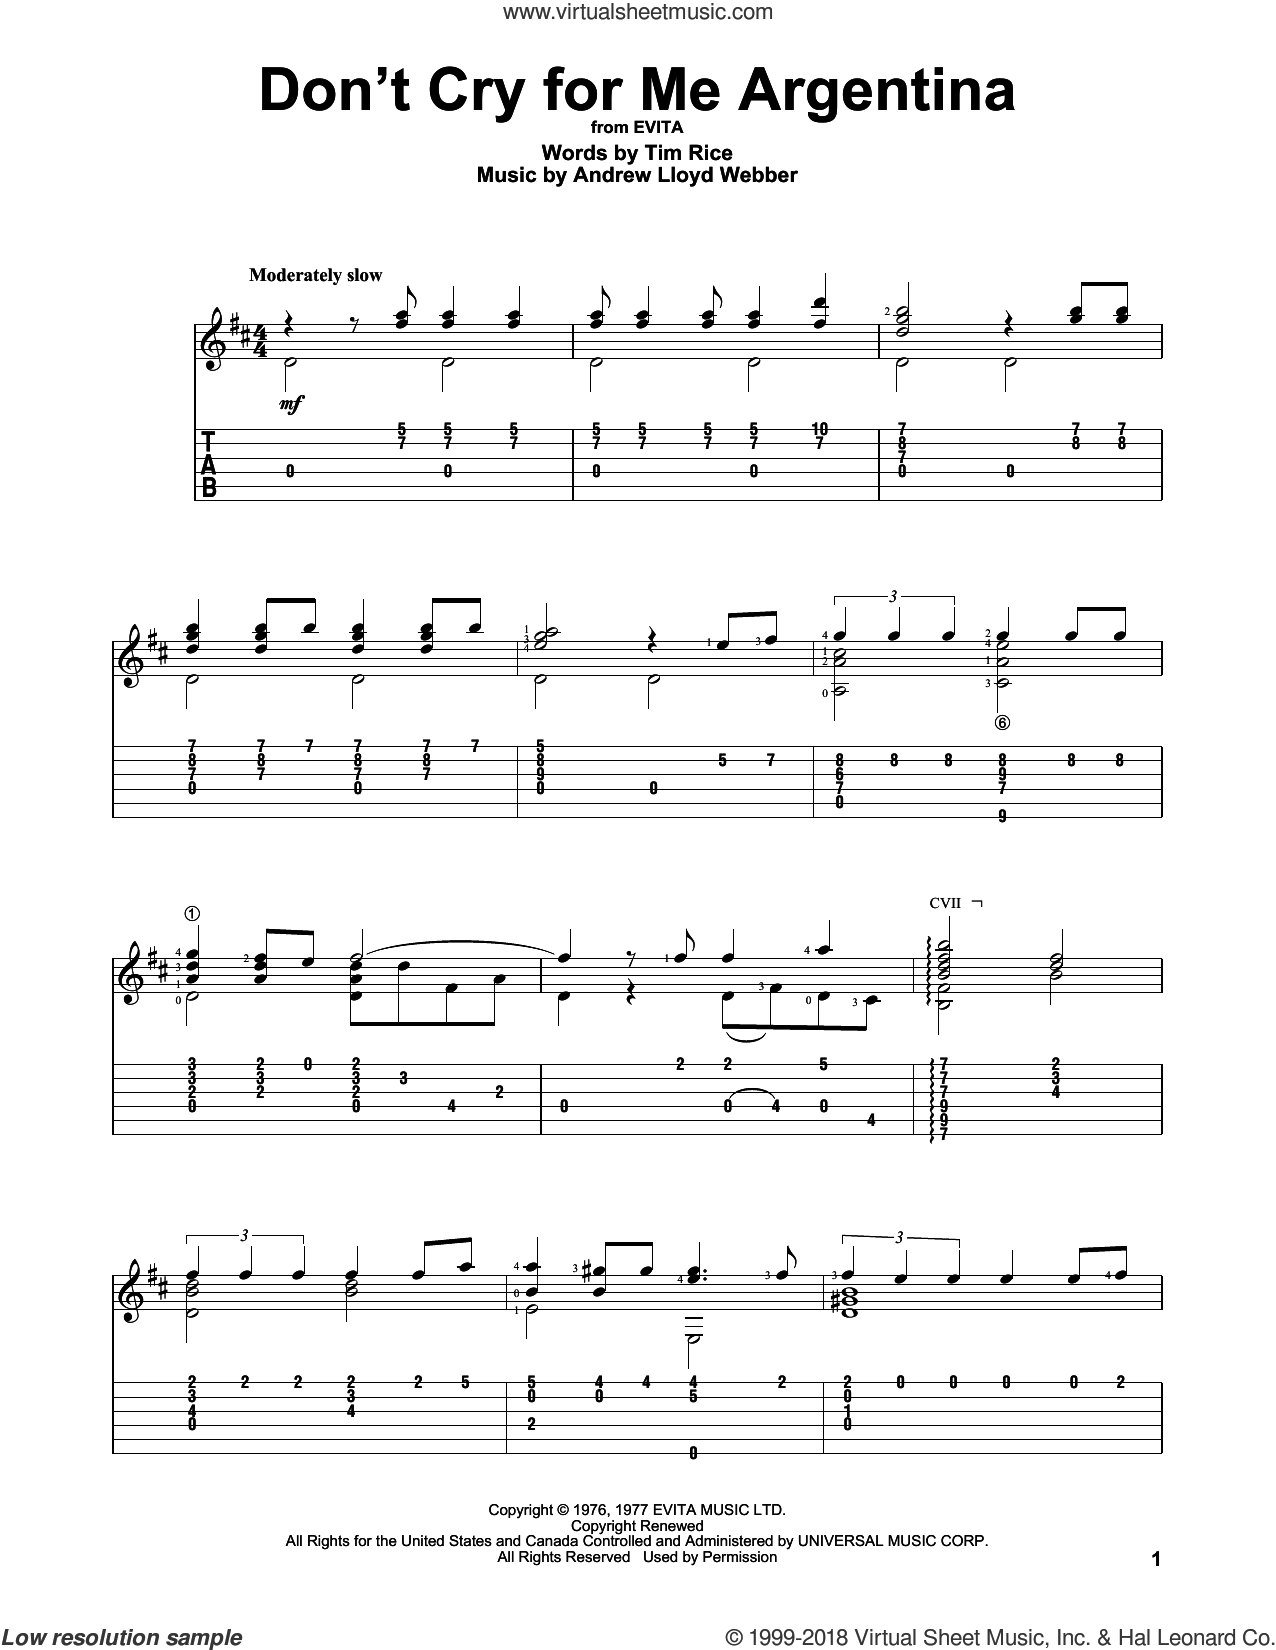 Don't Cry For Me Argentina sheet music for guitar solo v3